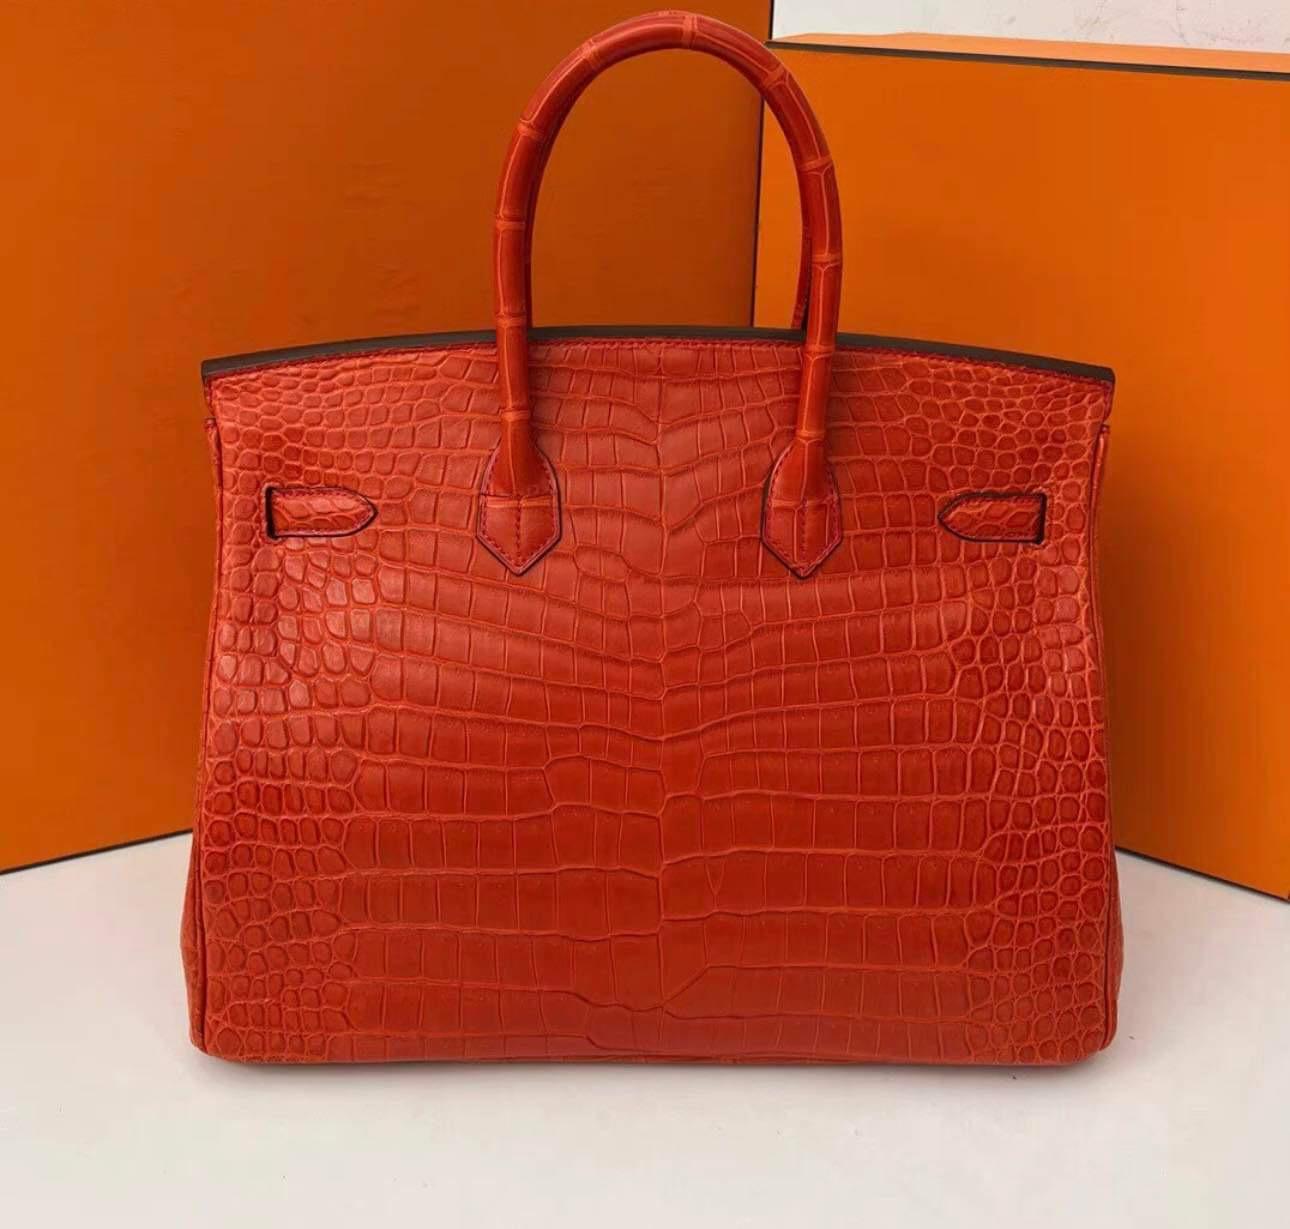 If you’re looking to add wealth to your arm, the Geranium Birkin by Hermès is one of the best ways to do so. This high-end bag with gold hardware is a true gem. It’s rarity makes it one of the most sought-after Hermès Birkin bags in the world. The